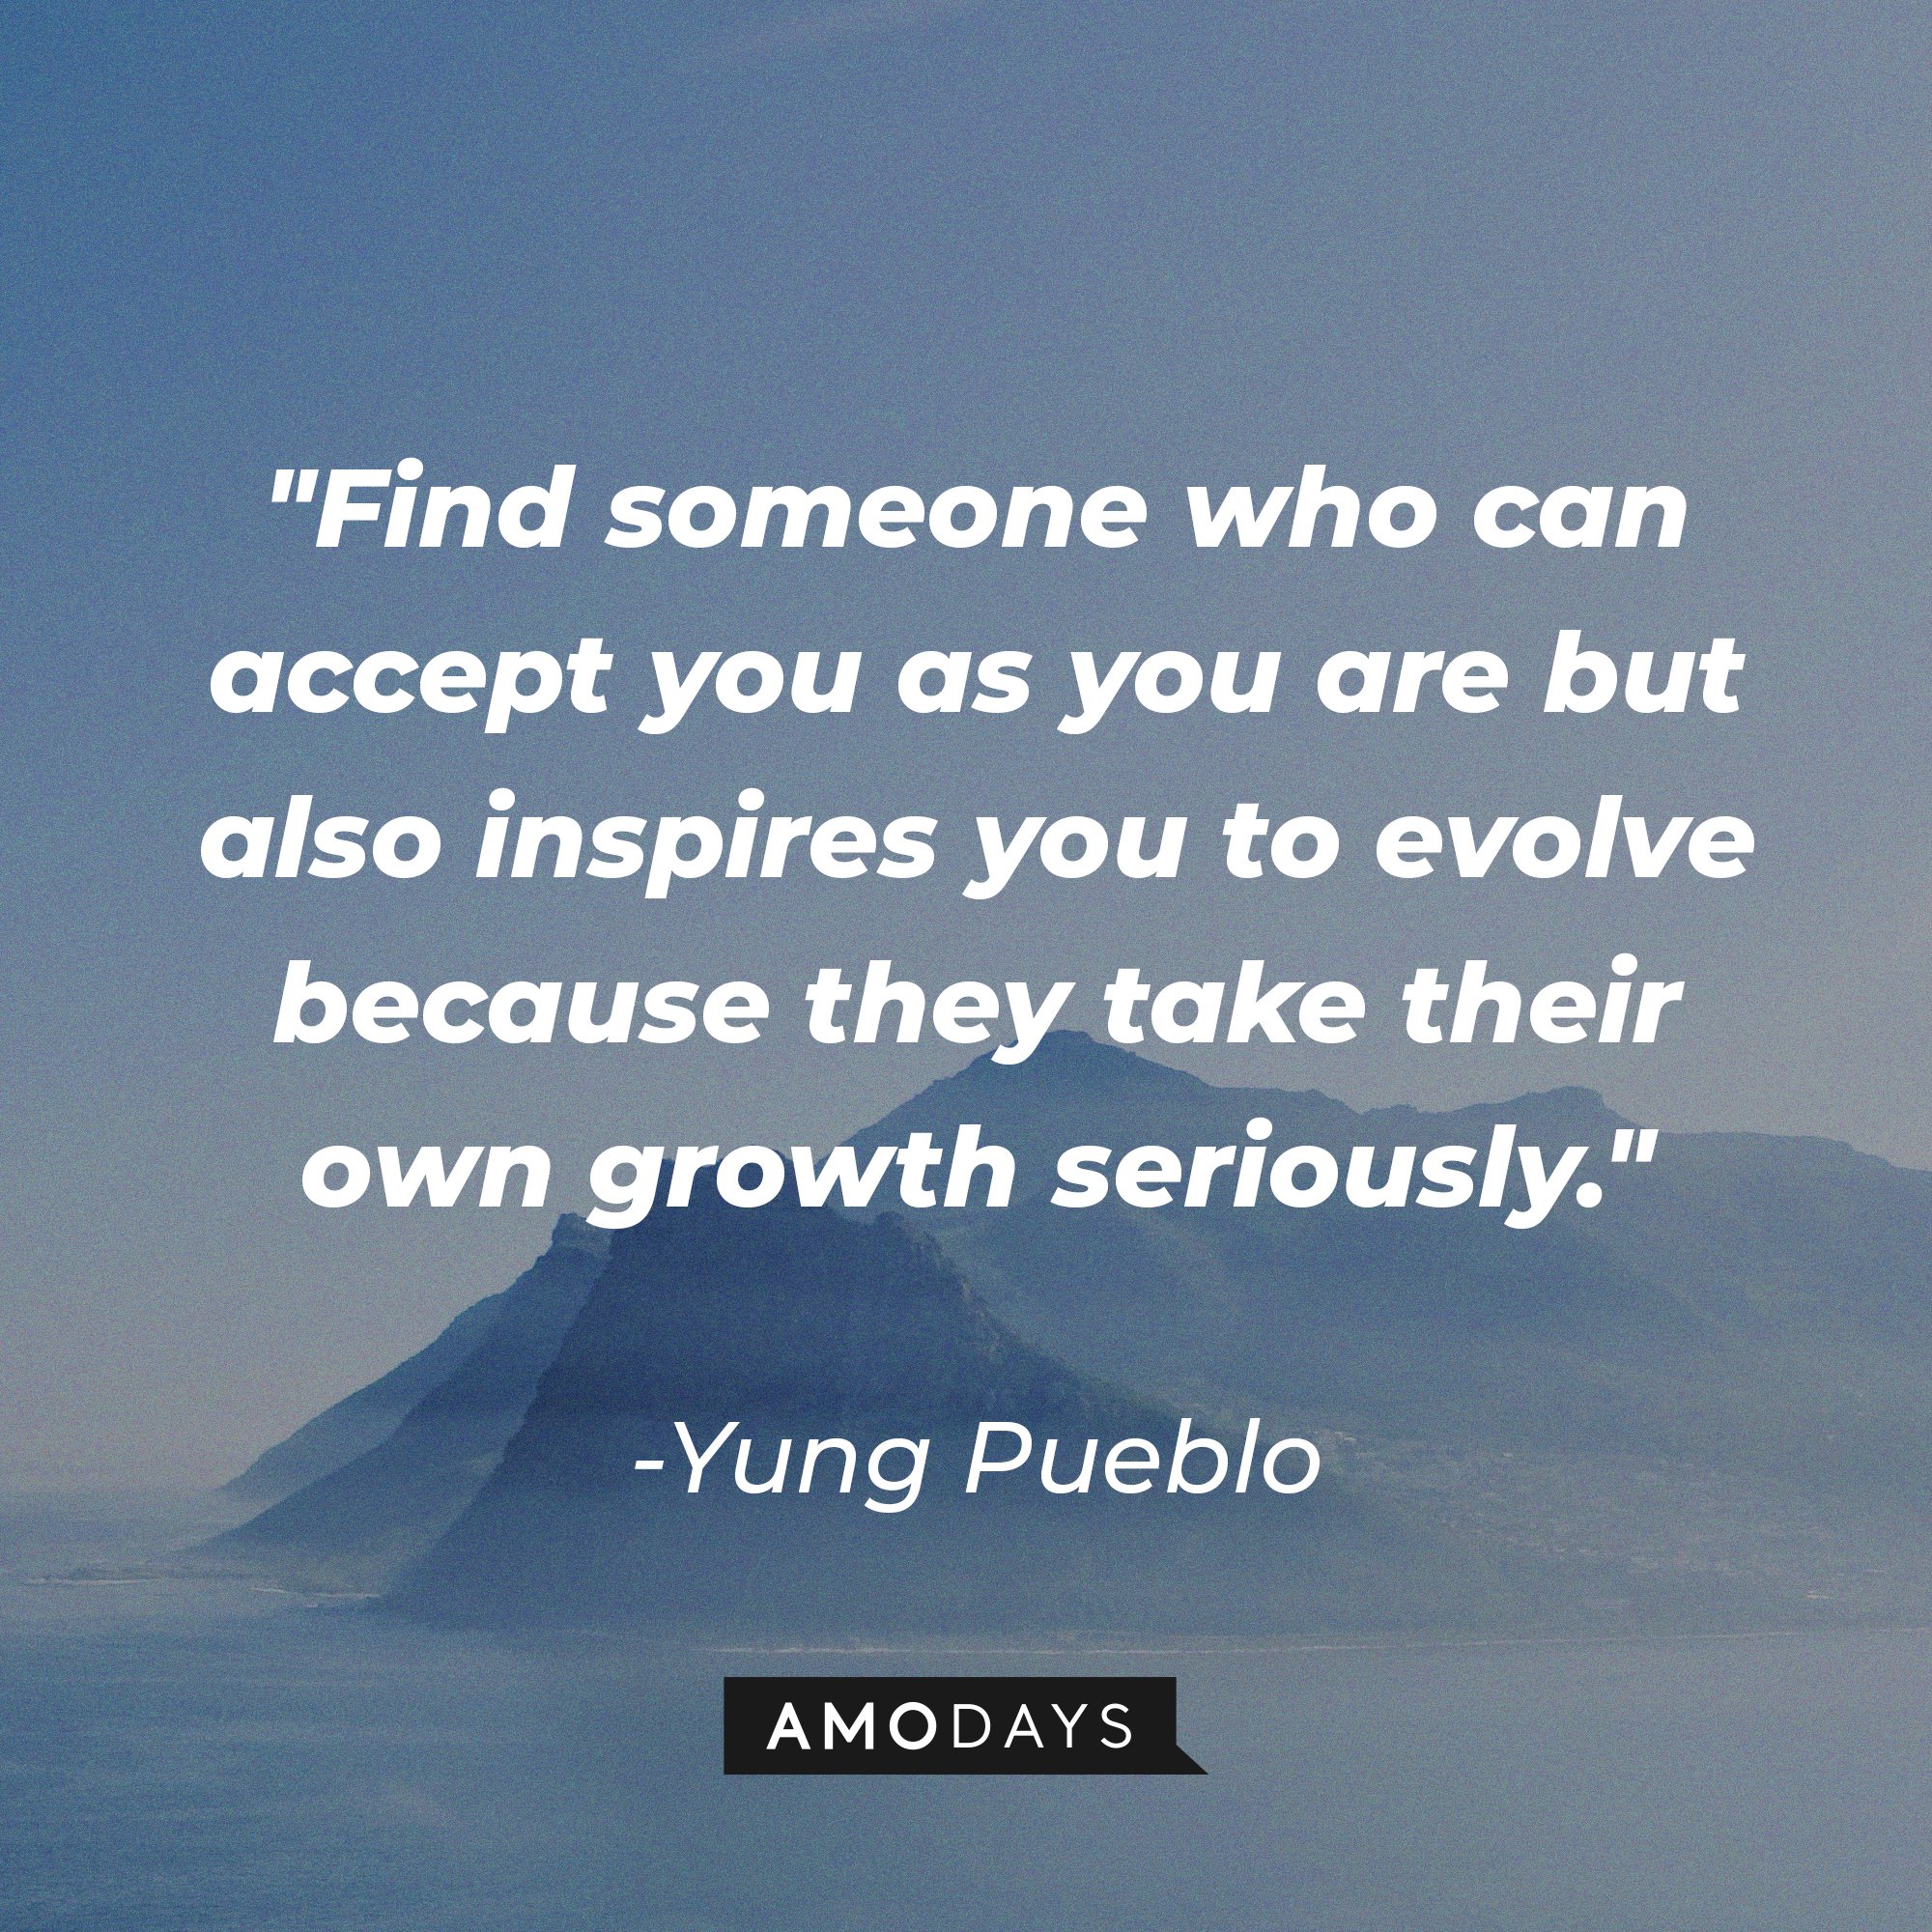 Yung Pueblo 's quote "Find someone who can accept you as you are but also inspires you to evolve because they take their own growth seriously." | Source: Unsplash.com